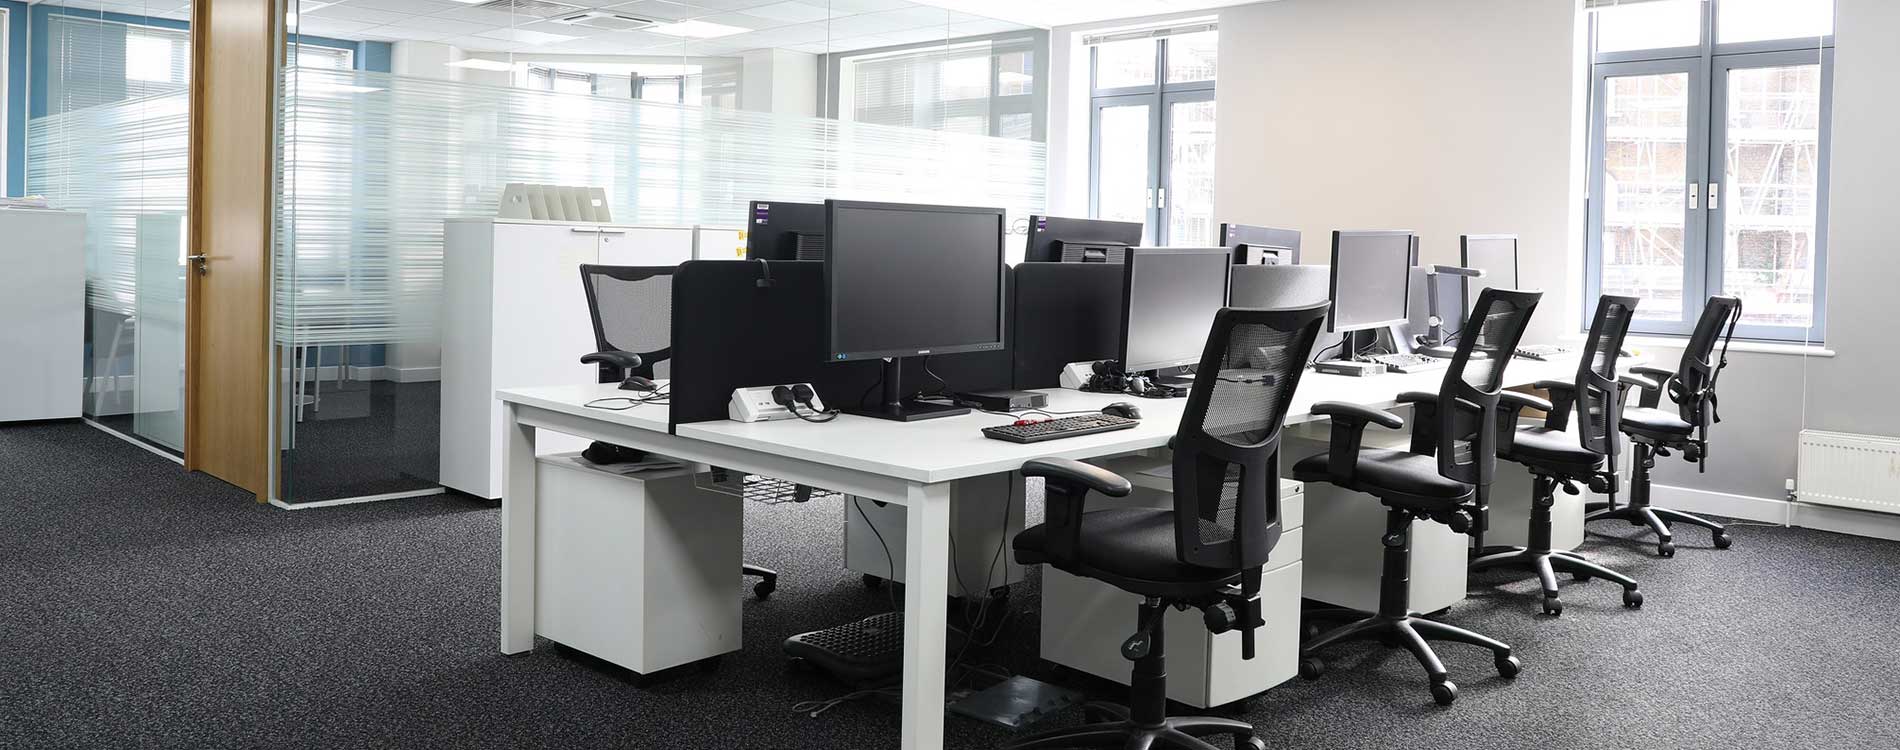 bank of desks in a bright and spacious office